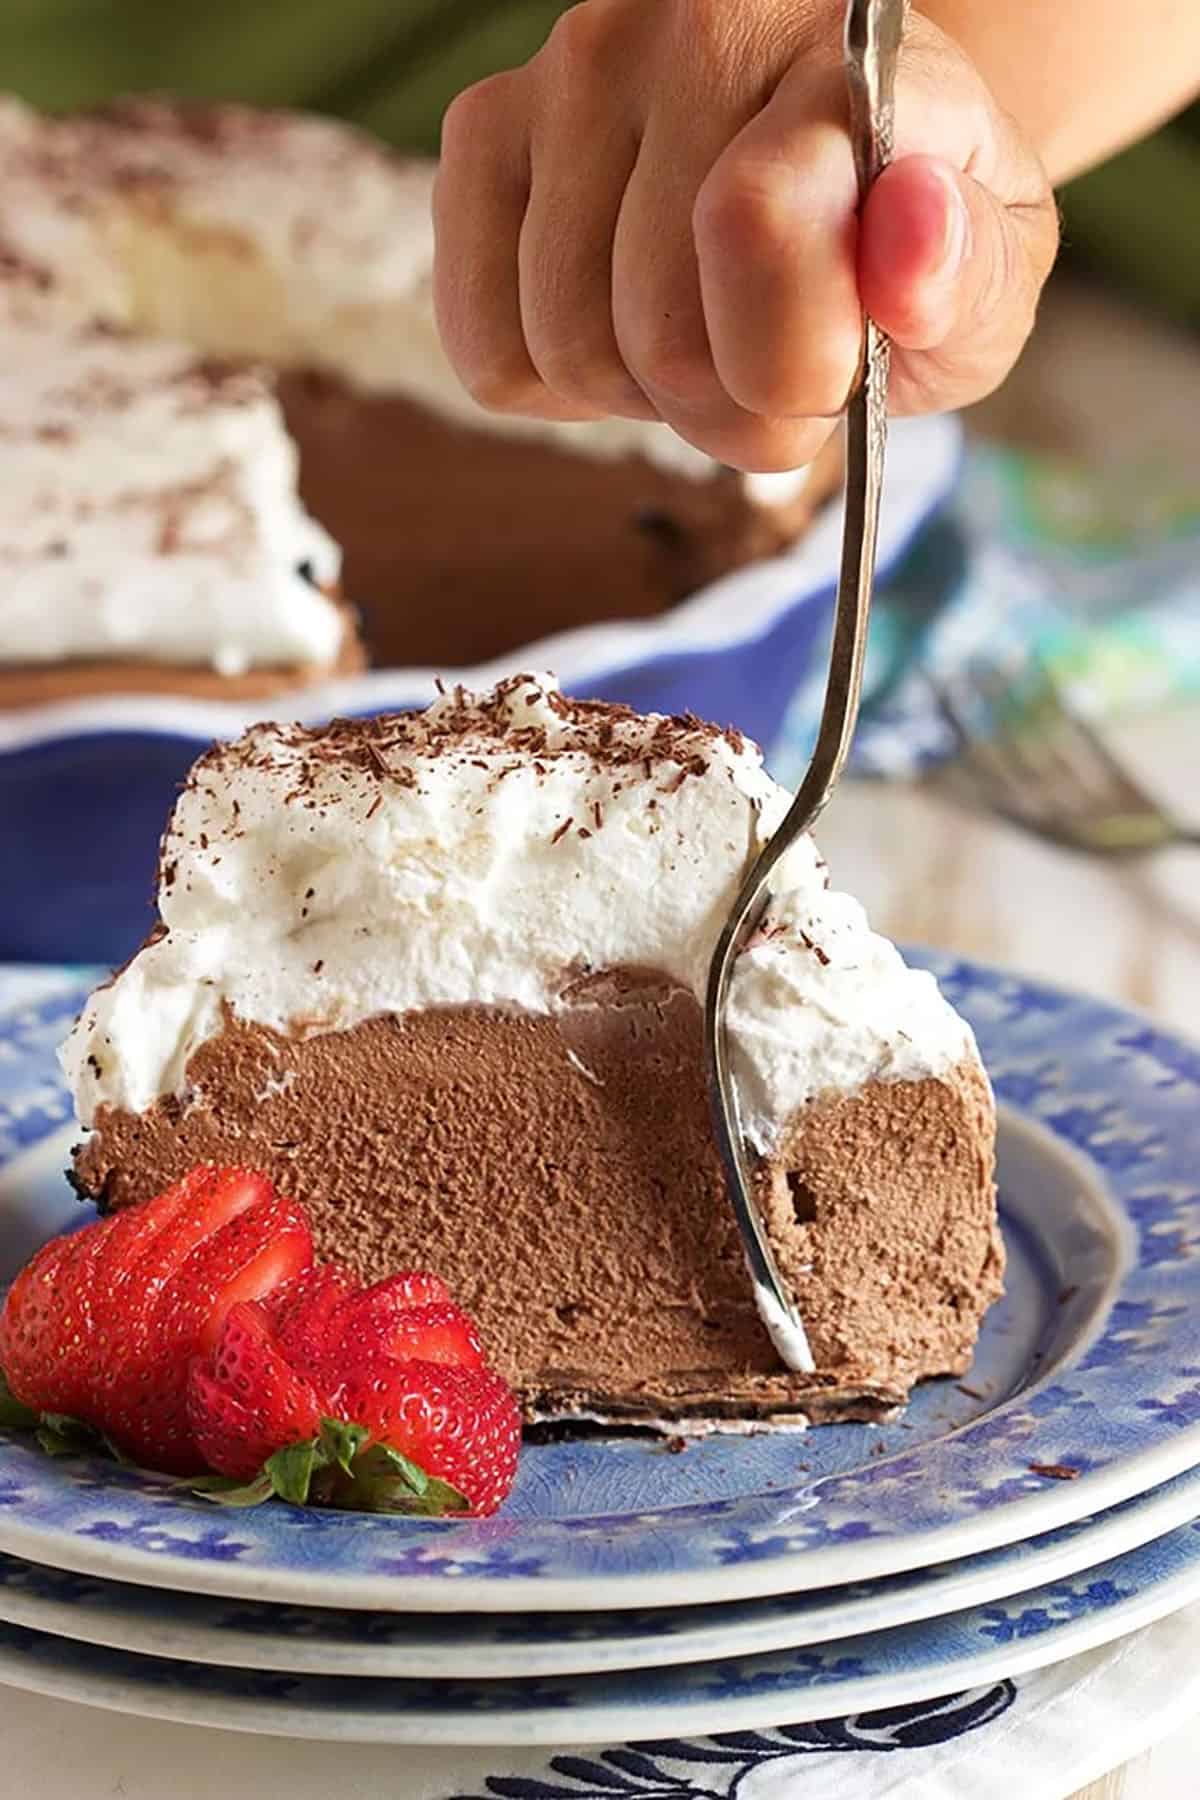 Chocolate Mousse Pie slice with a fork taking a bite.